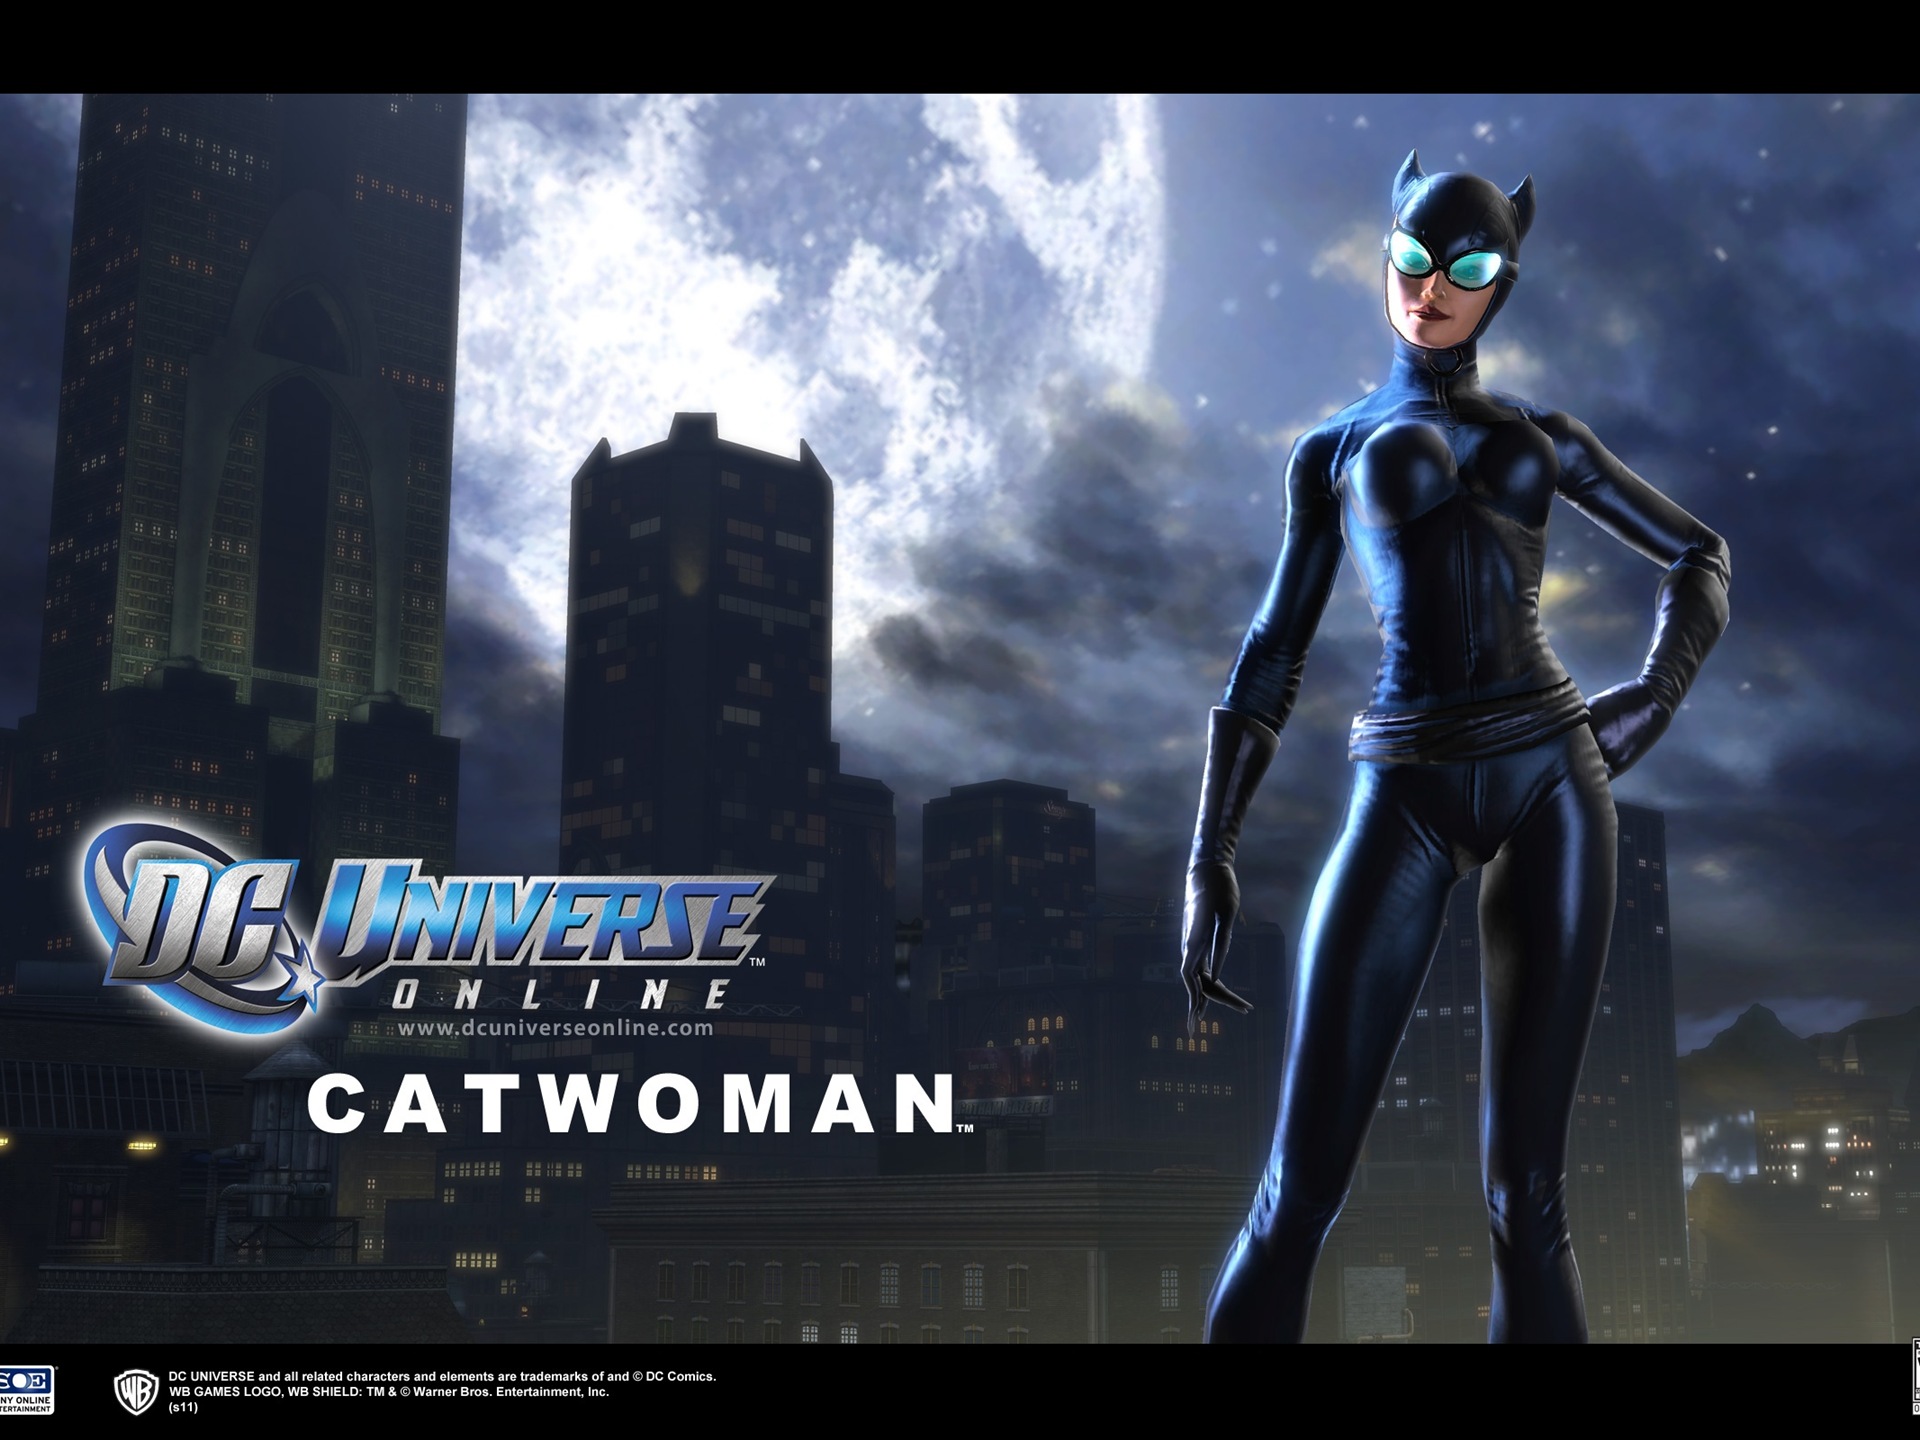 DC Universe Online HD game wallpapers #14 - 1920x1440